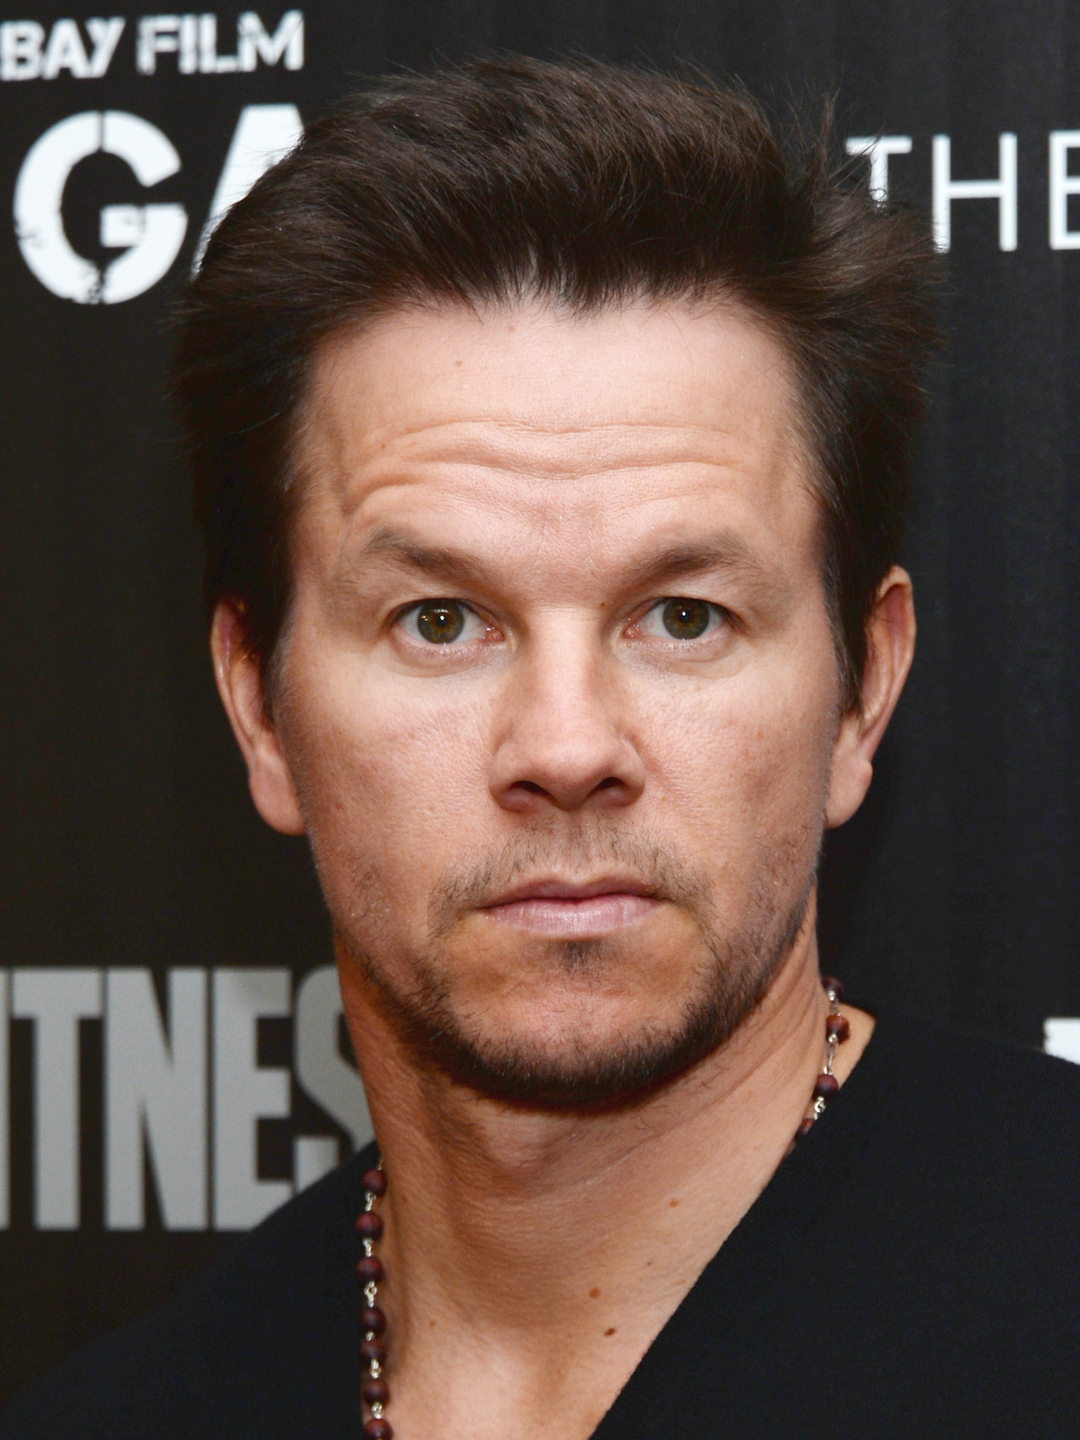 Mark Wahlberg who is his father